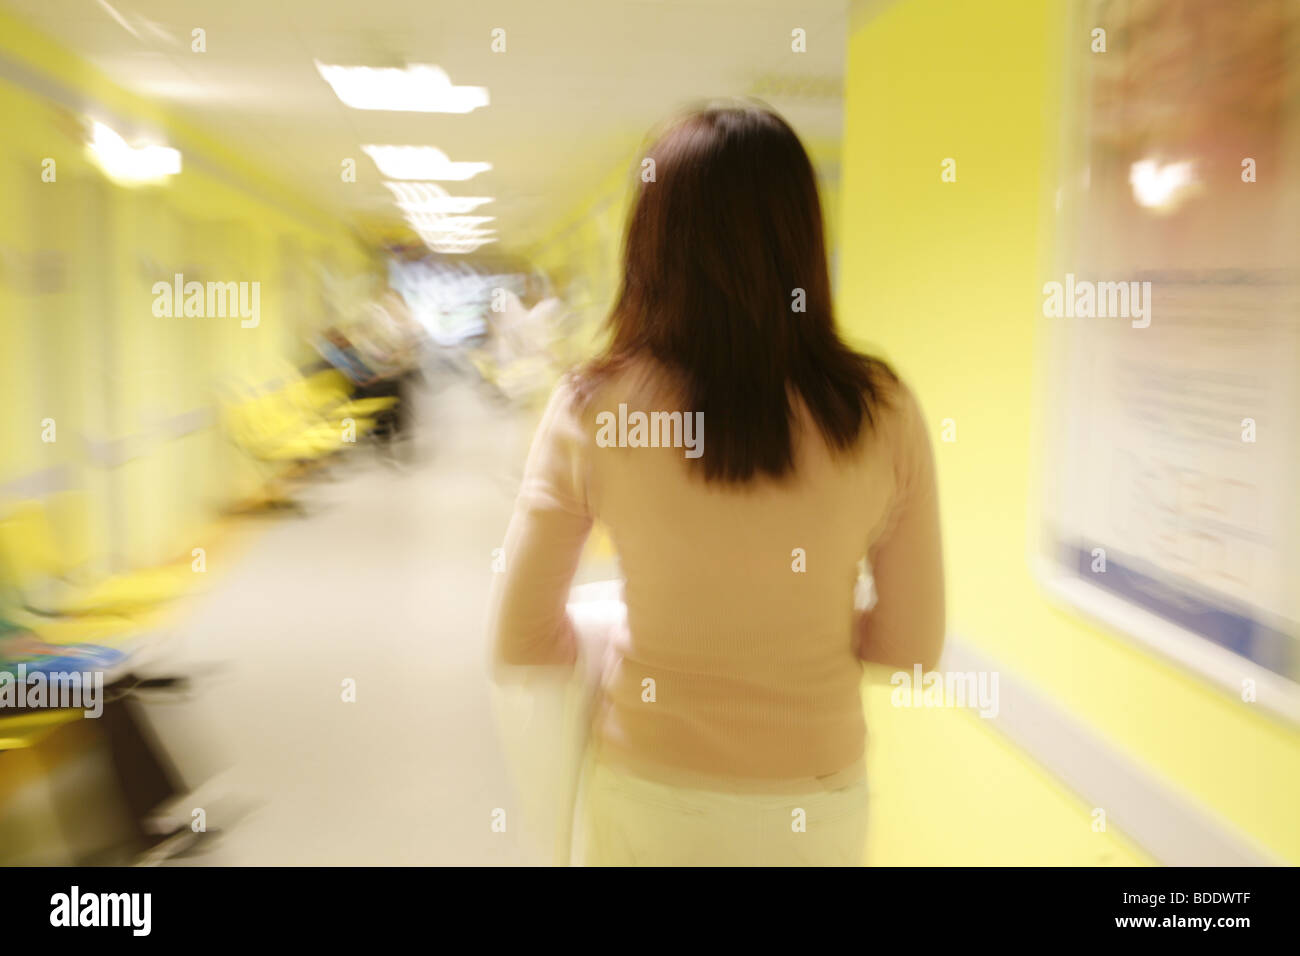 Blurred view of hospital hallway Stock Photo